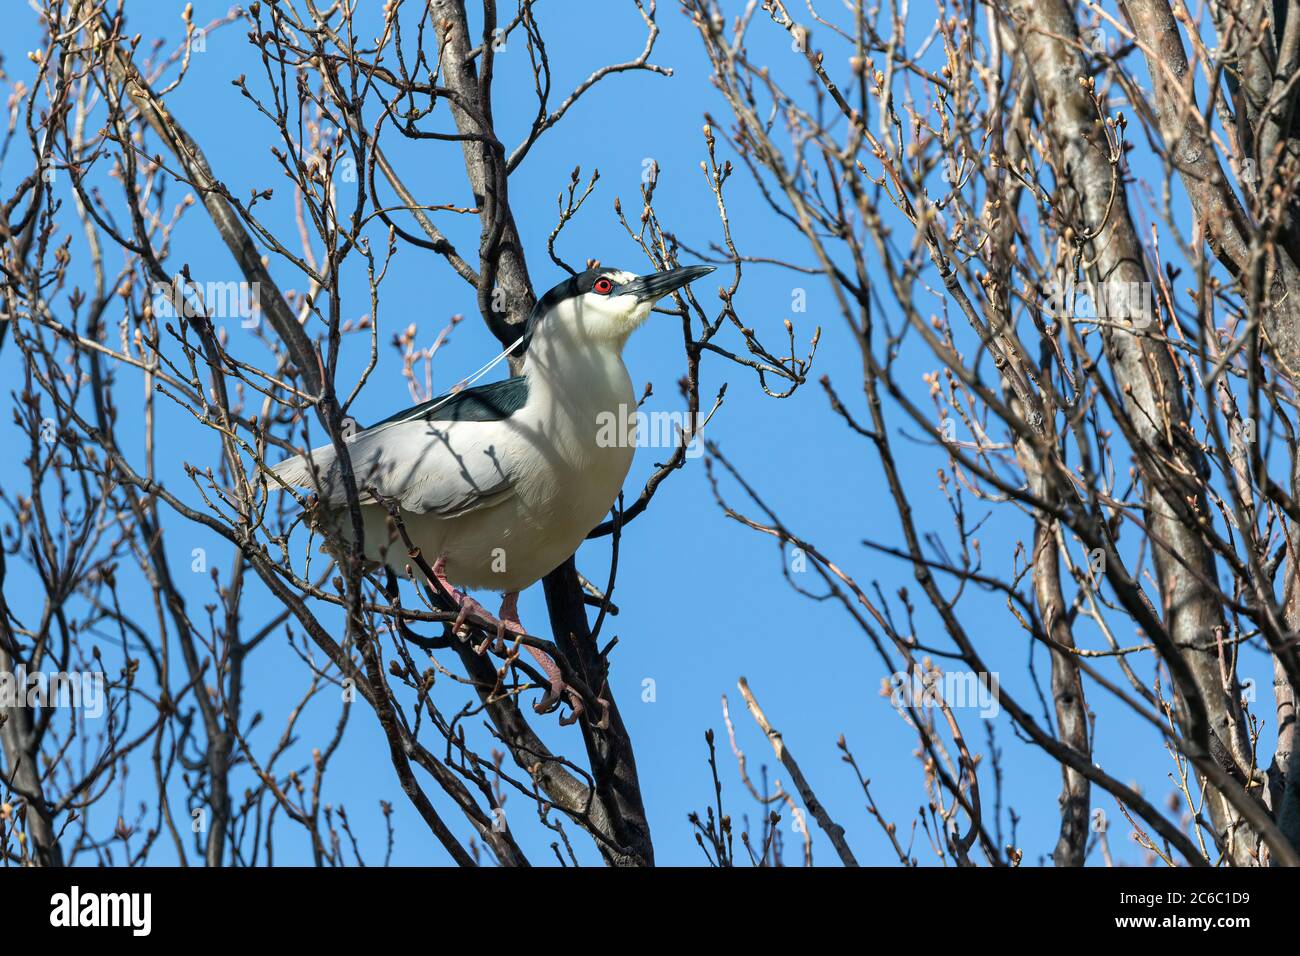 A Black-crowned Night Heron with long white head plumes is eyeing a tree limb in his nest gathering quest. Stock Photo